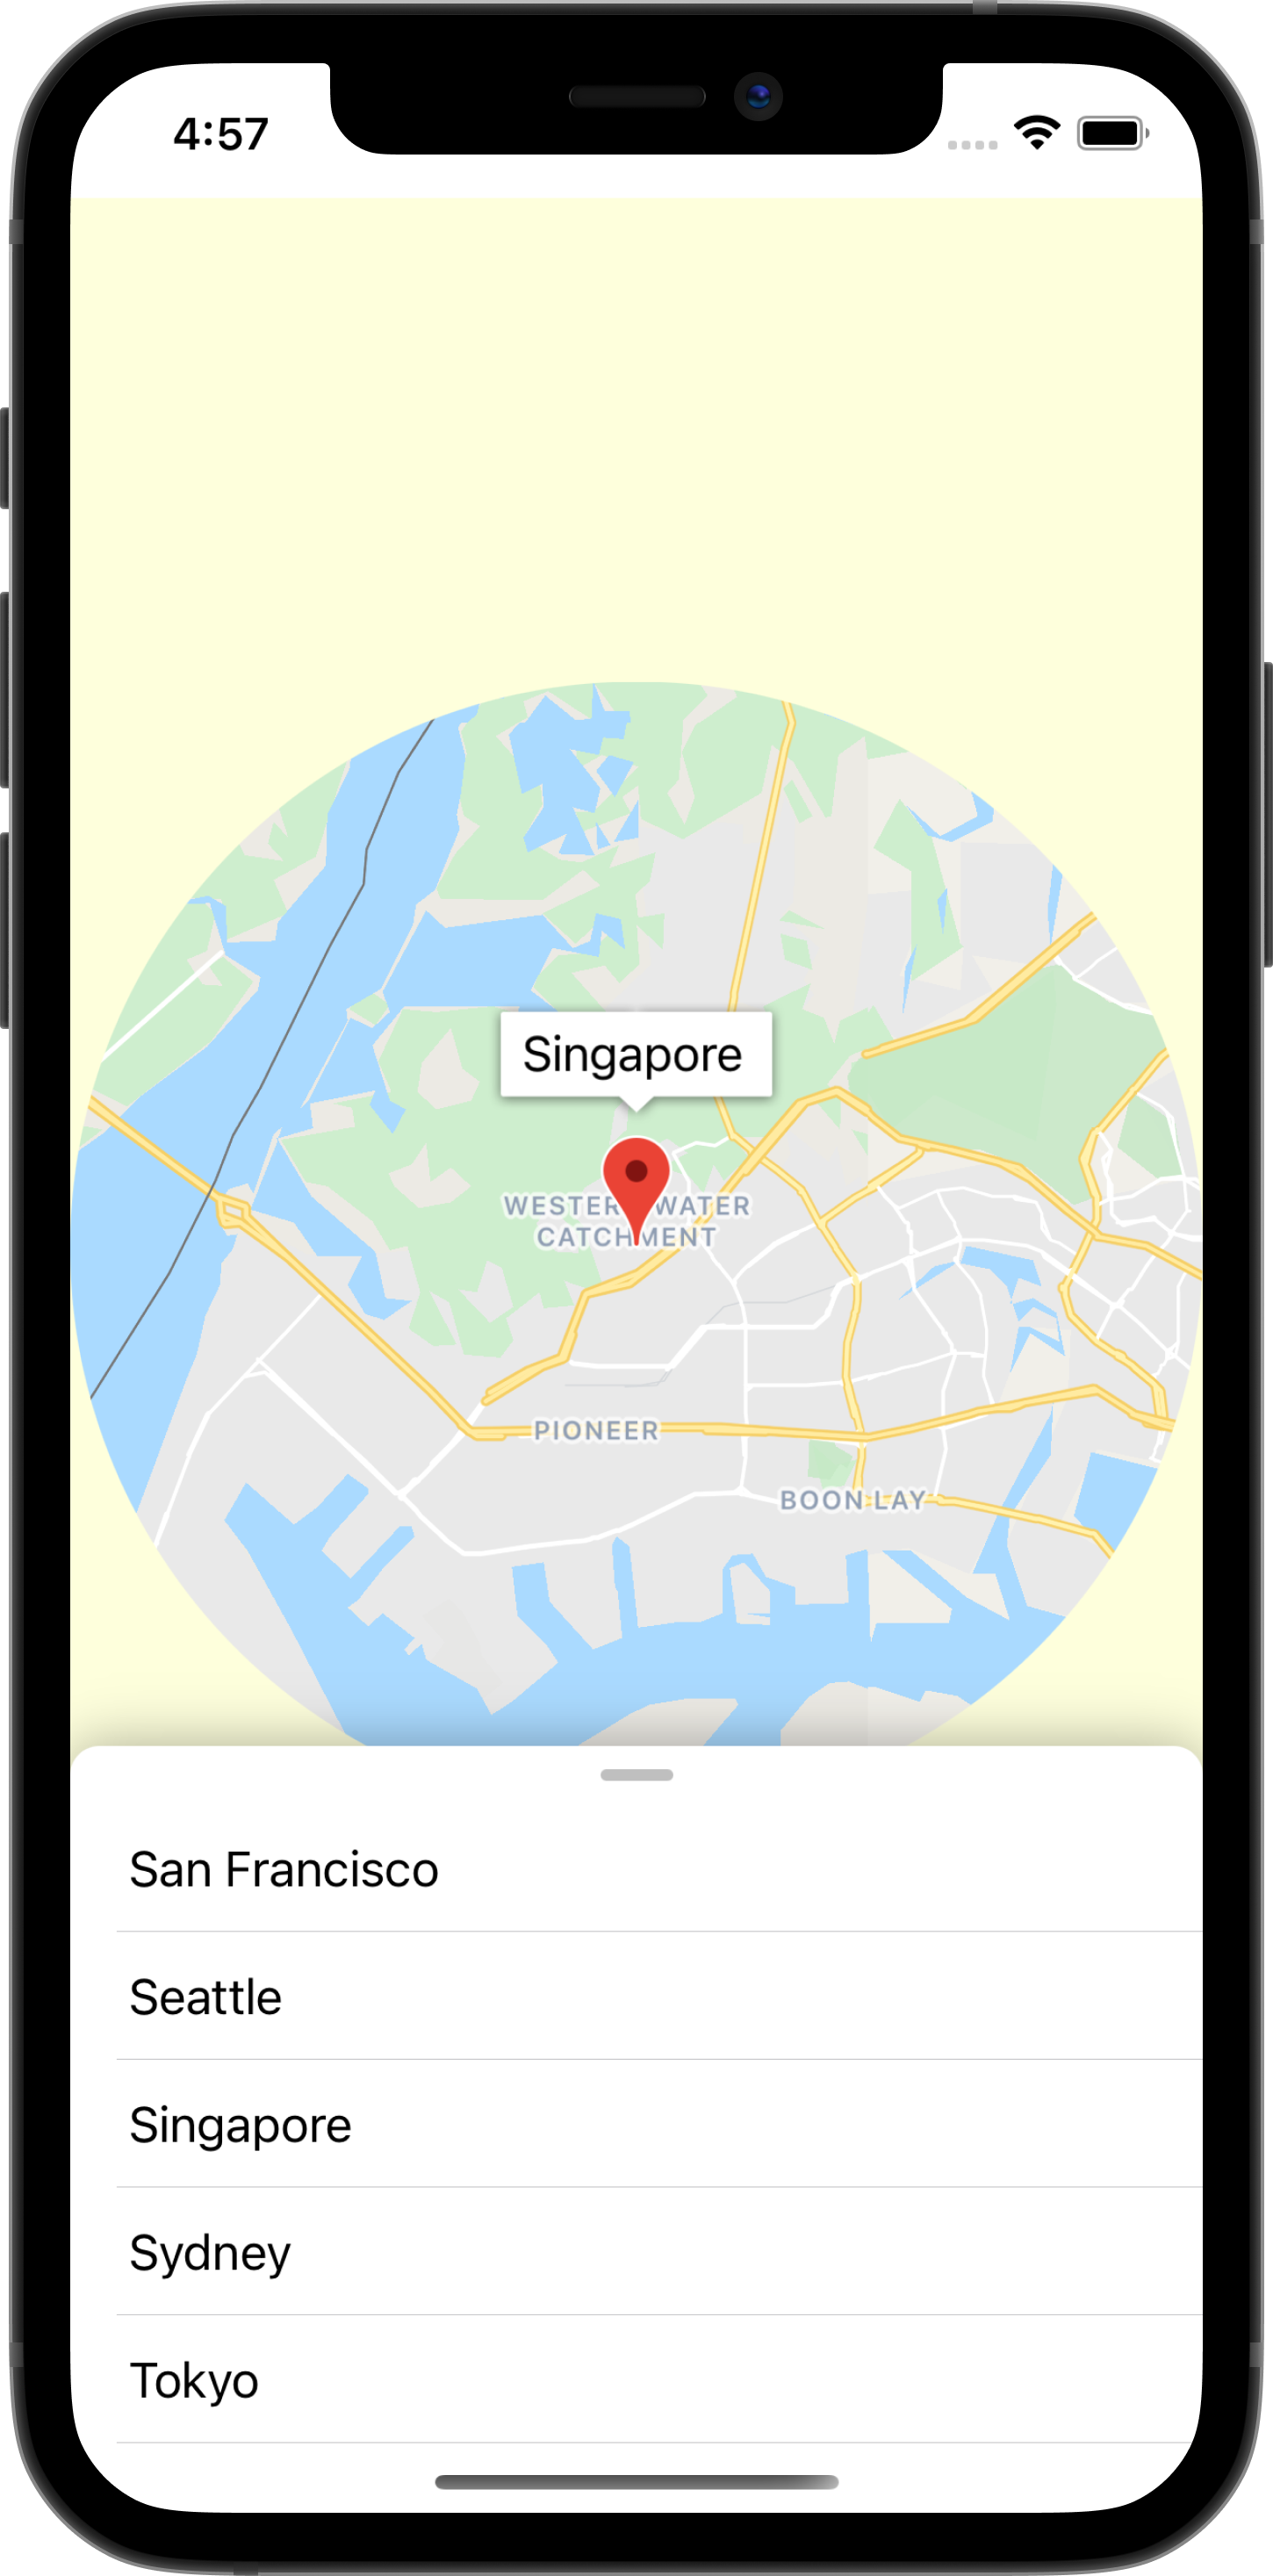 Add a map to your iOS app with SwiftUI (Swift)